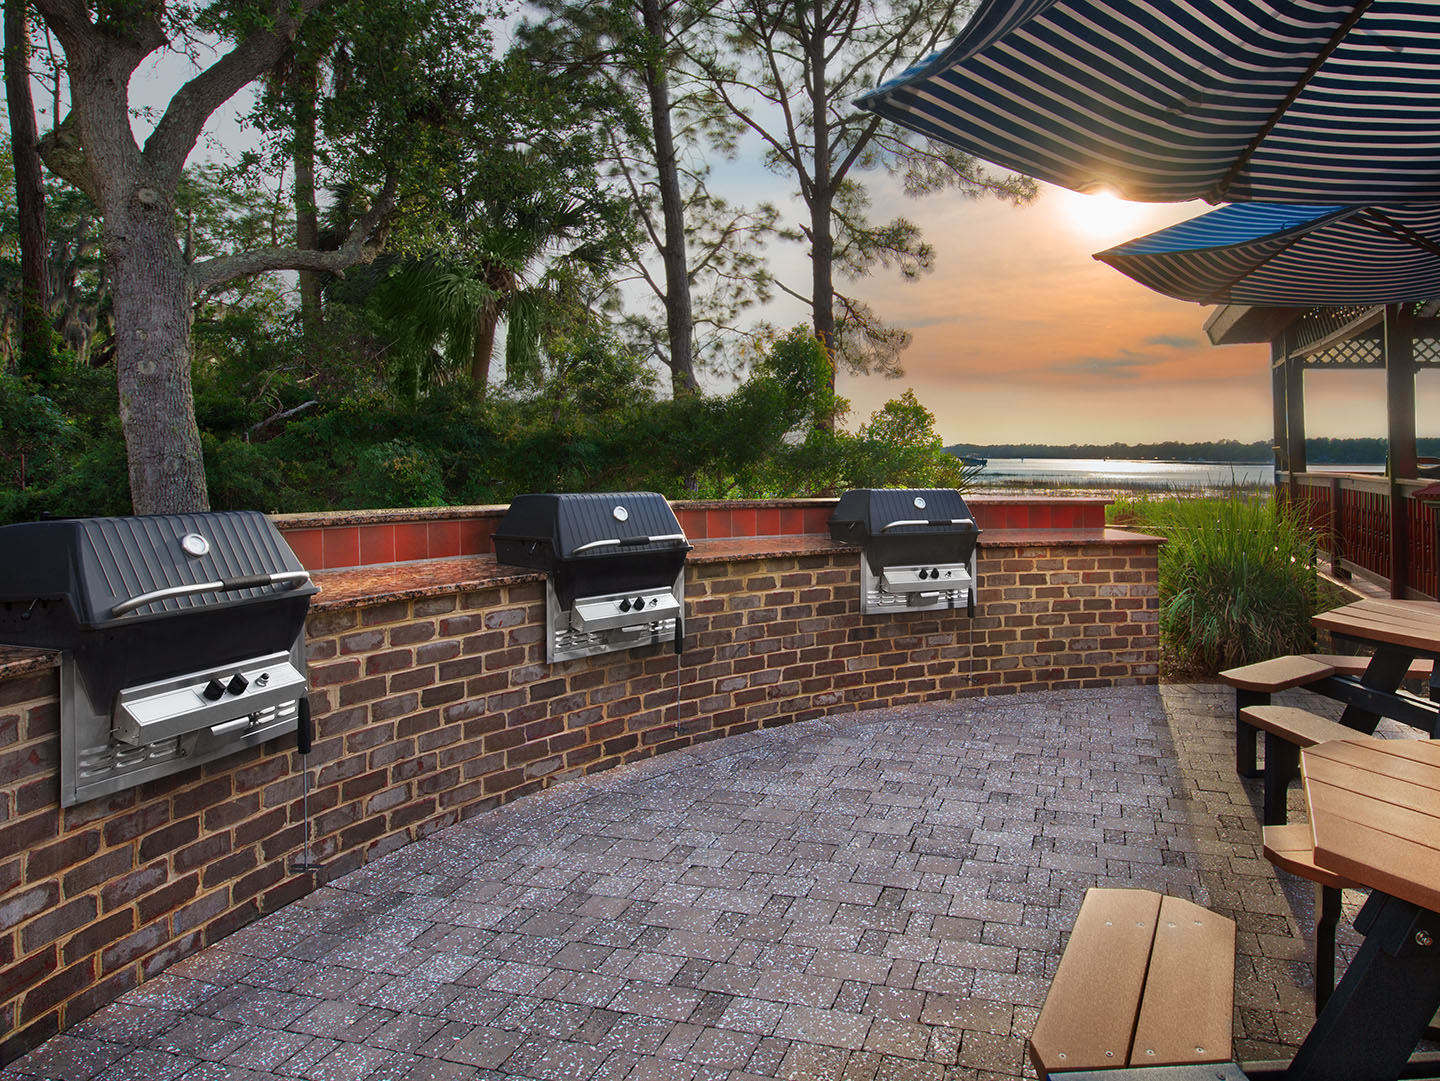 Marriott's Sunset Pointe Grills. Marriott's Sunset Pointe is located in Hilton Head Island, South Carolina United States.